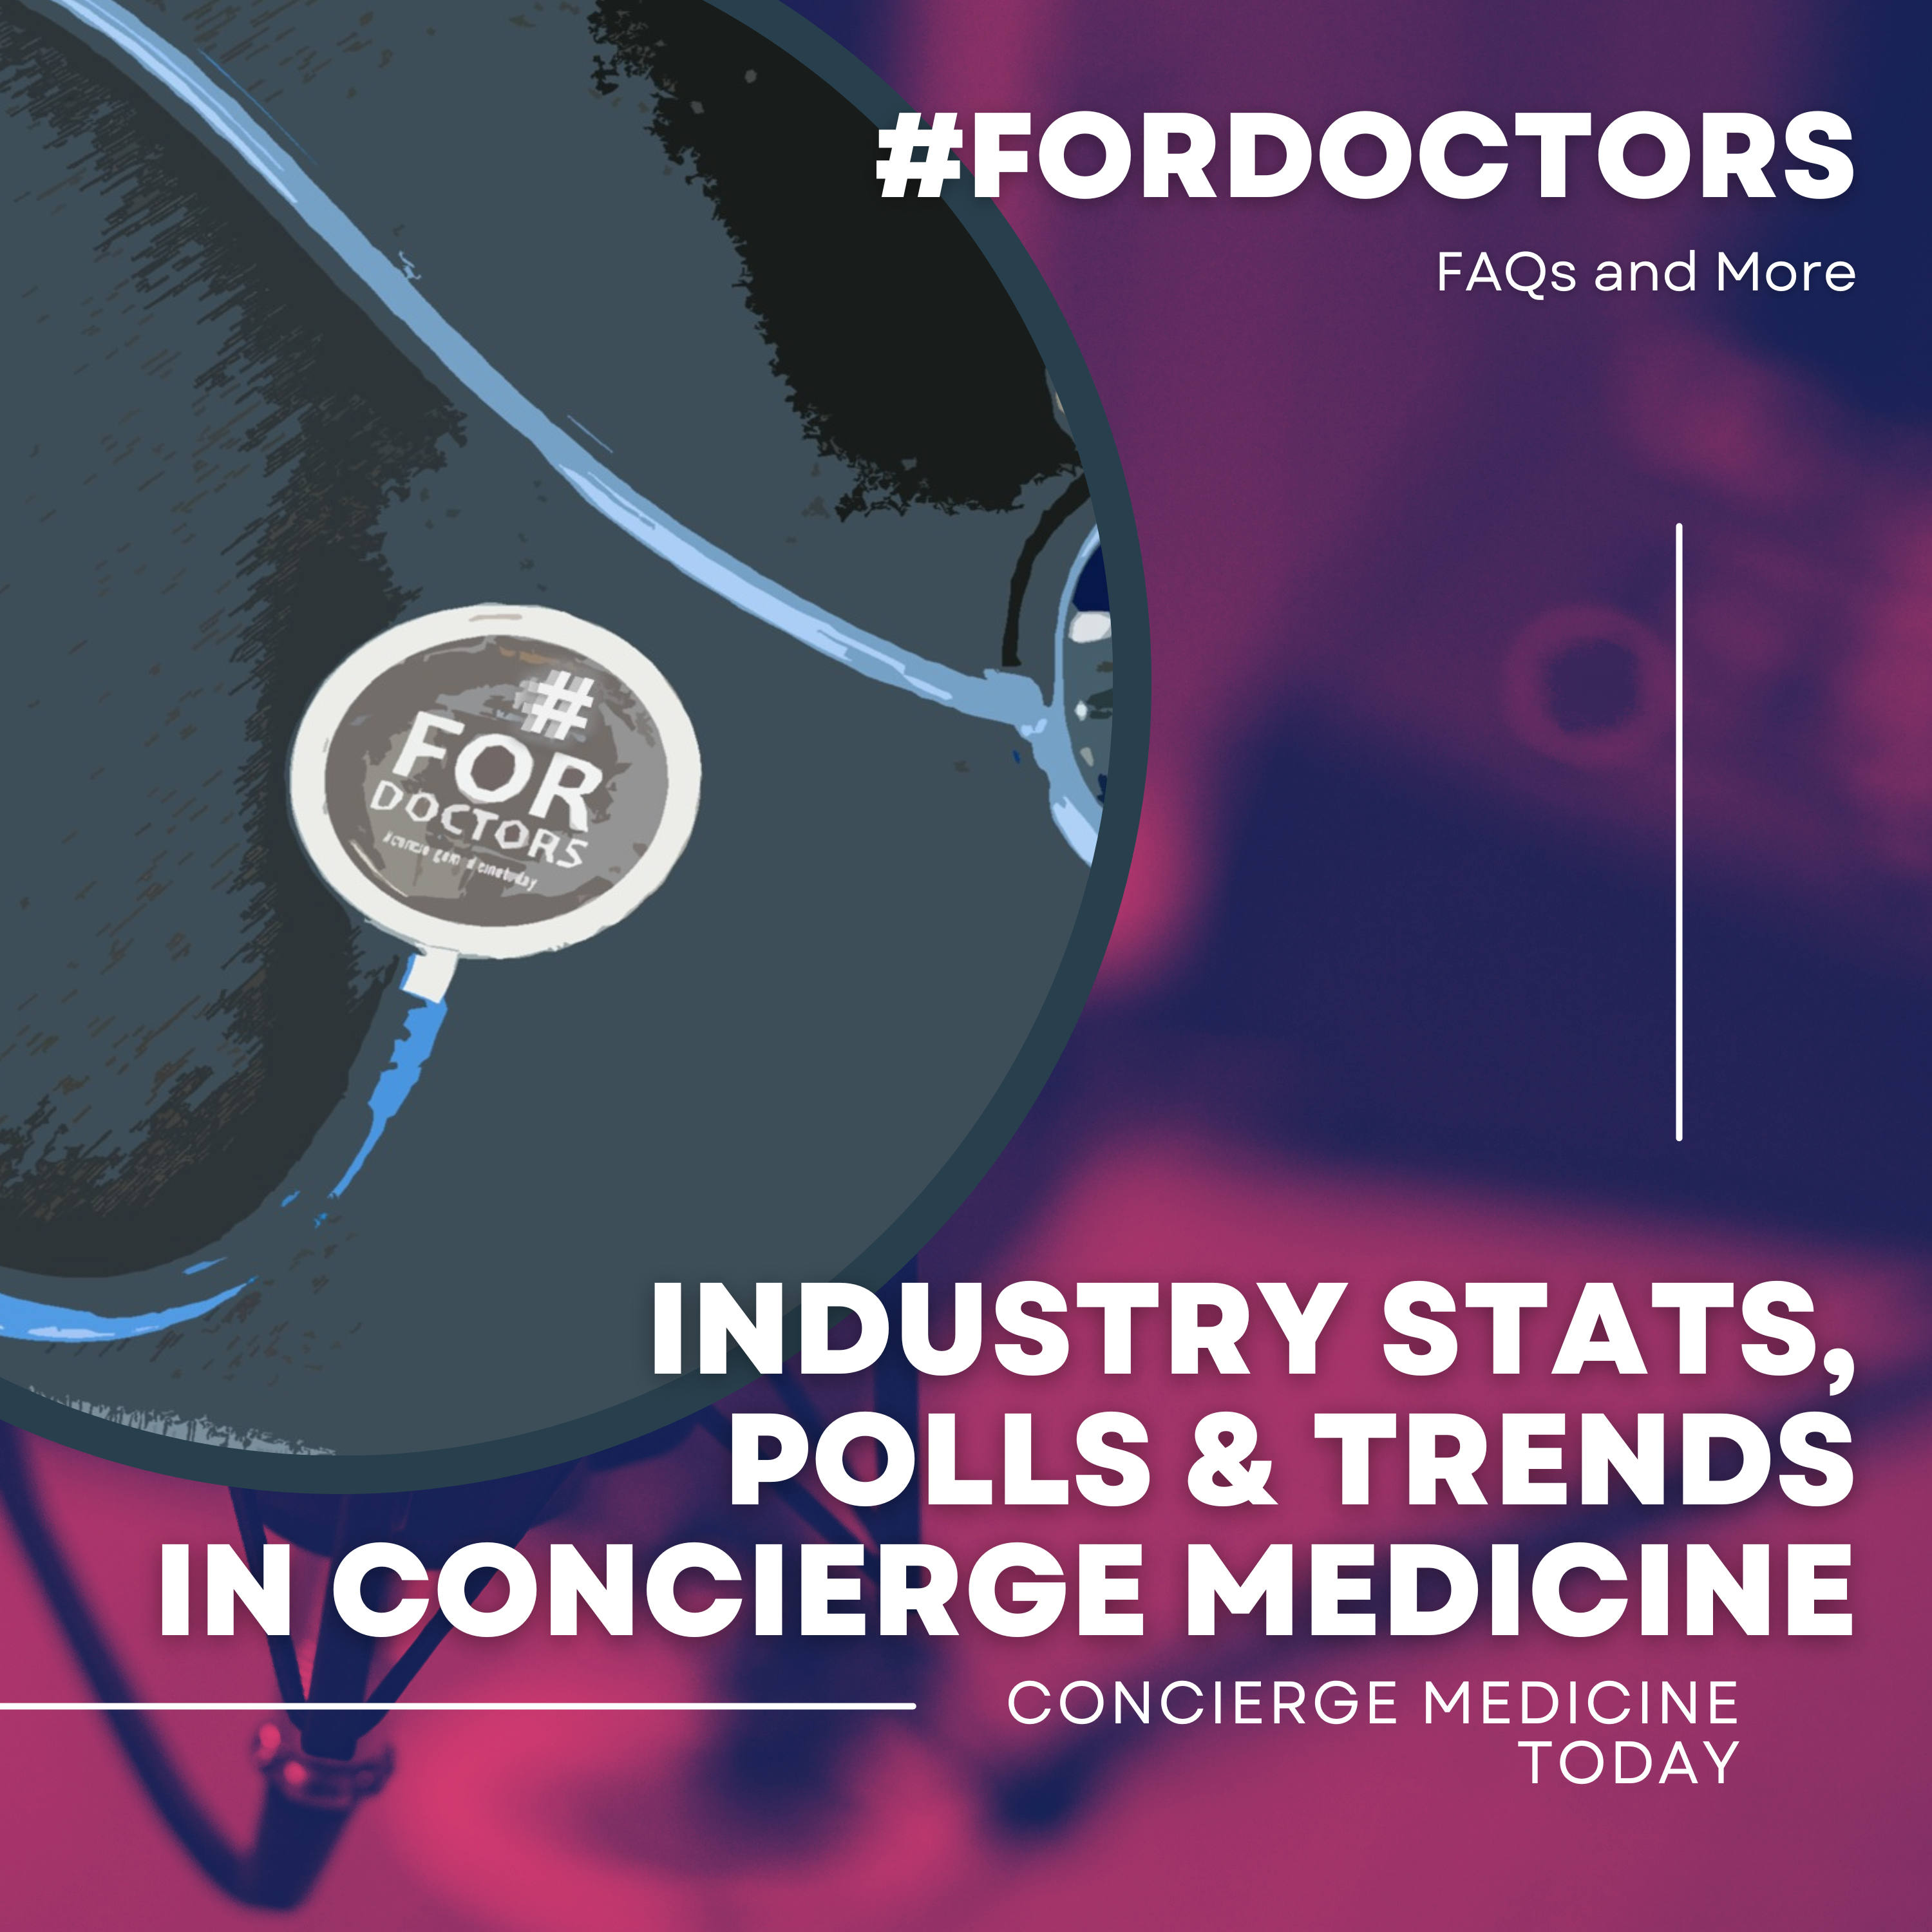 Poll: Average Annual Salary of a Concierge Doctor? (2021-2022)